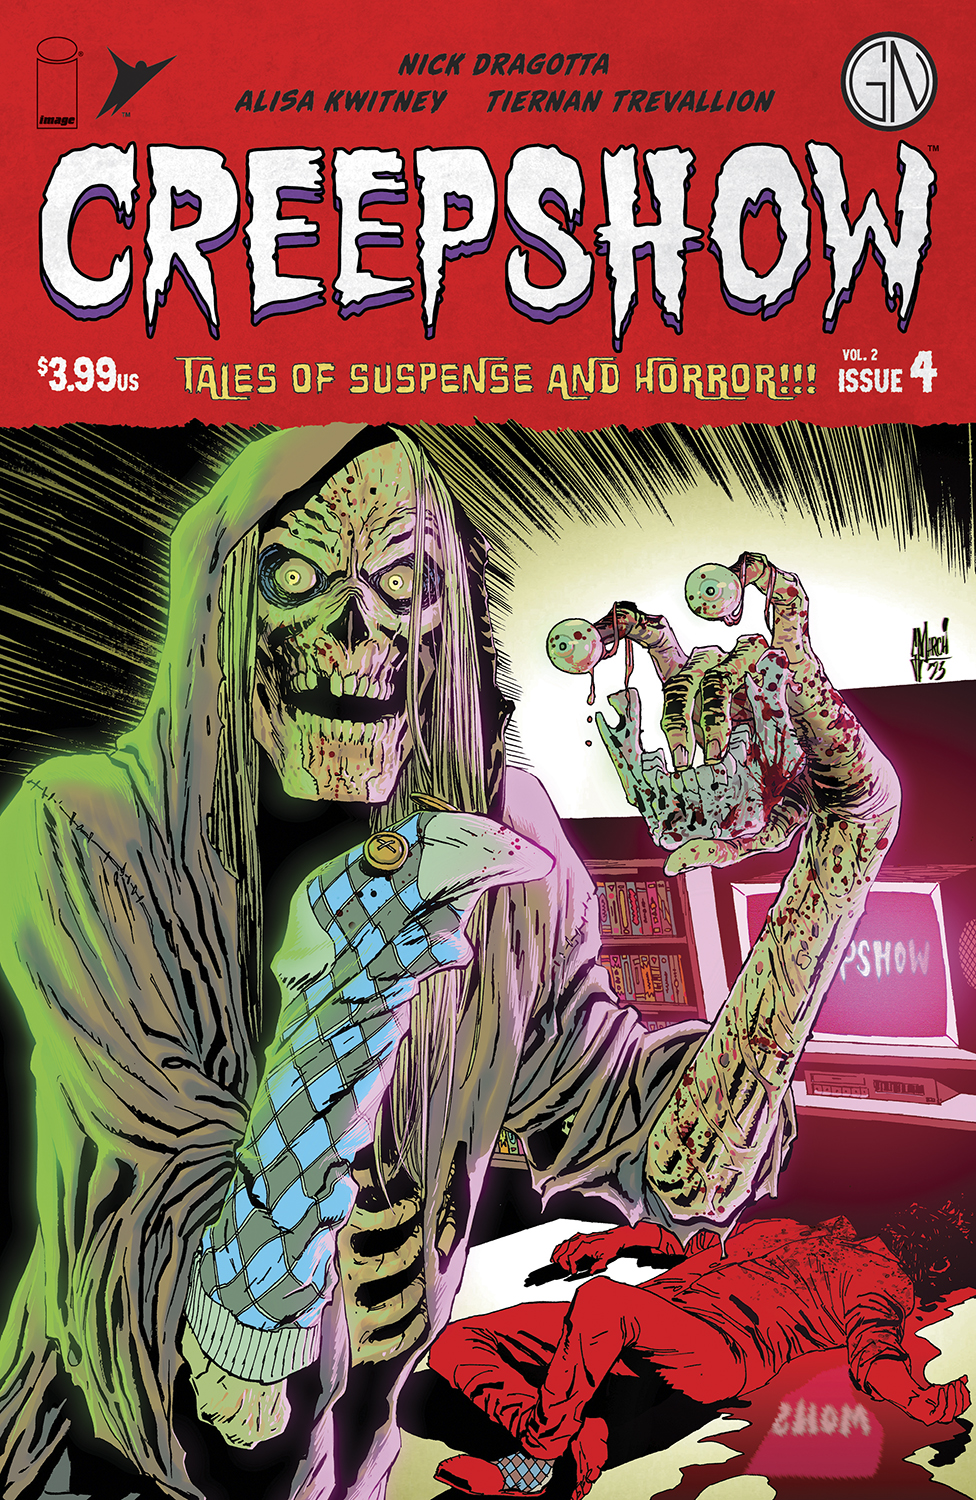 Creepshow Volume 2 #4 Cover A March (Of 5)